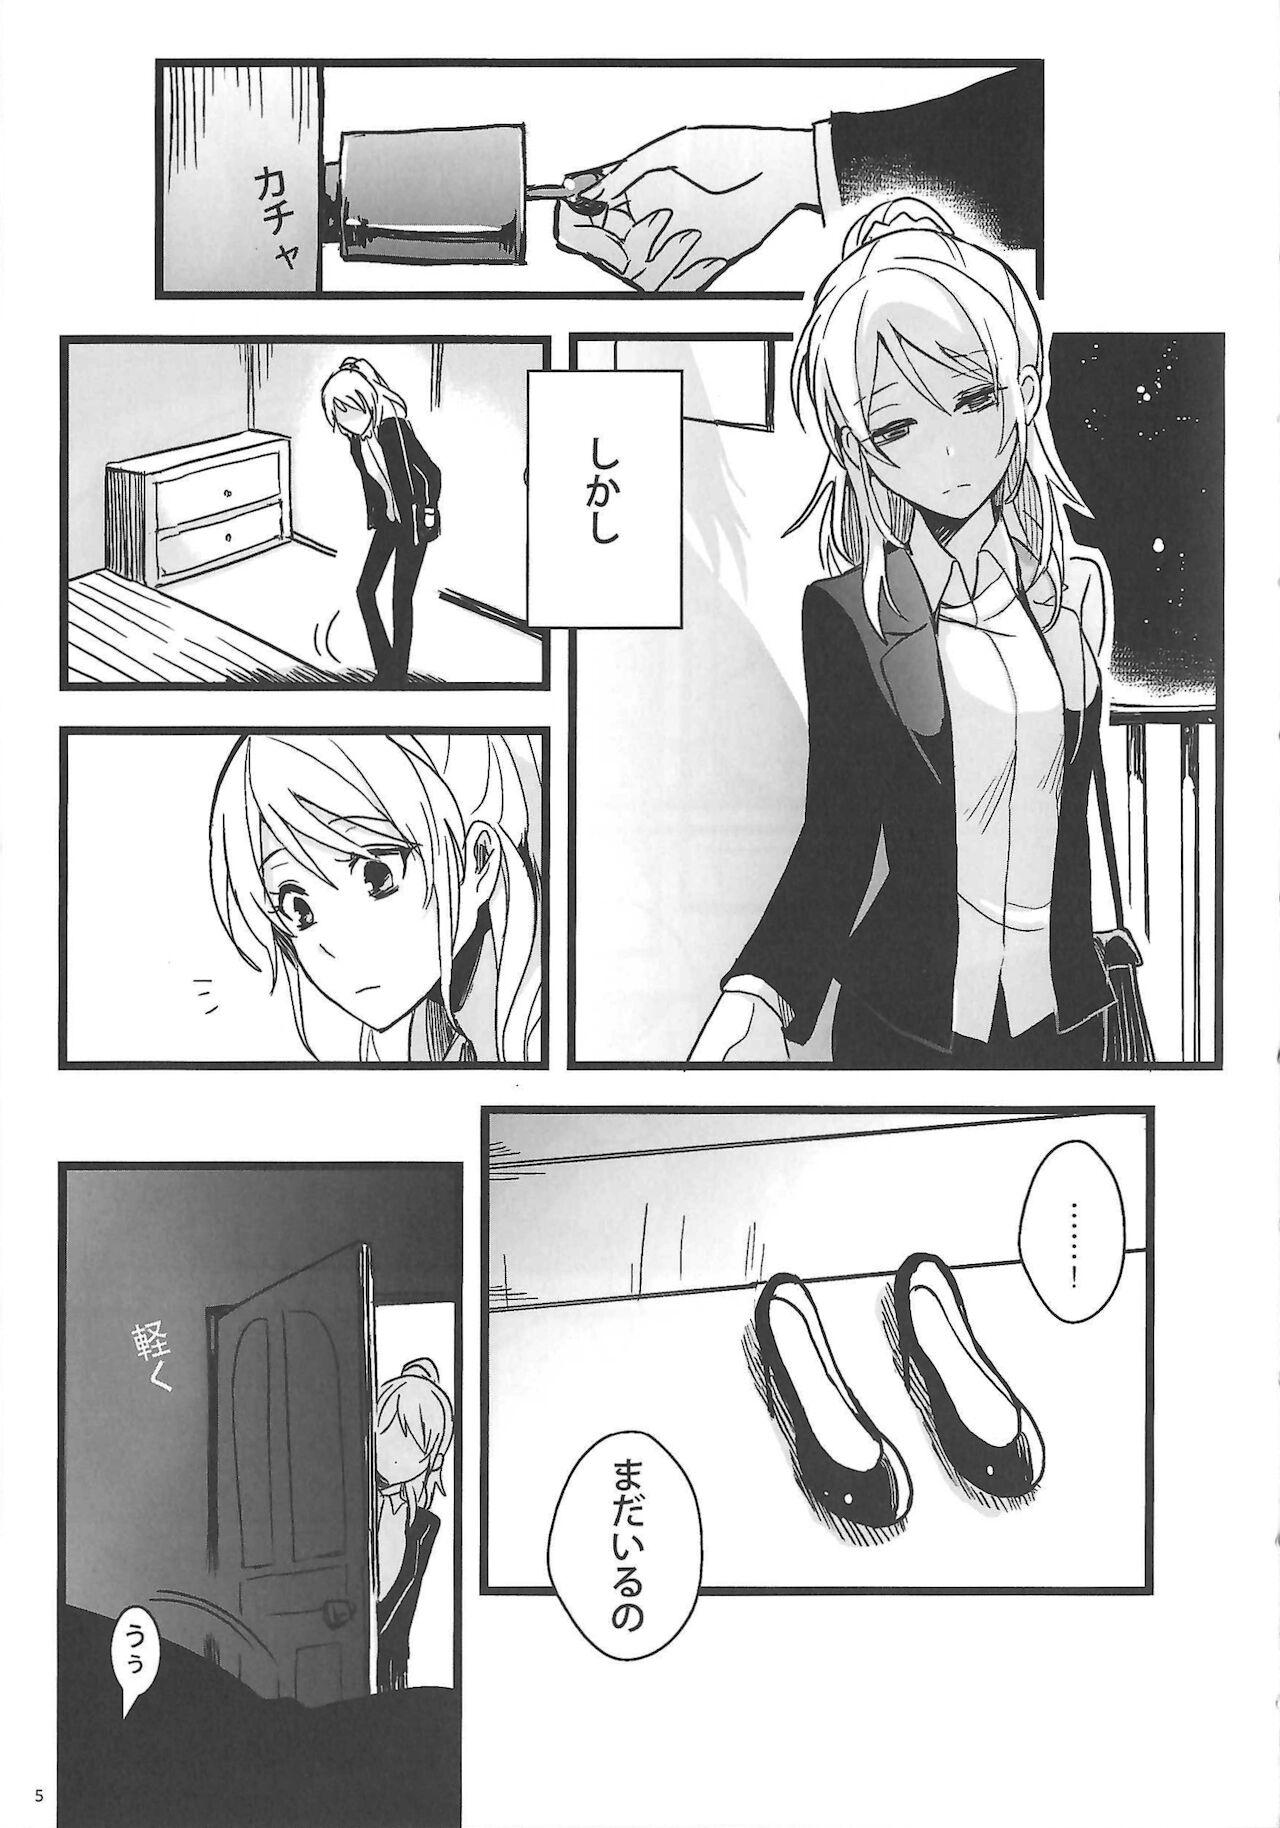 Bra Ode to Losers - Love live Men - Page 6